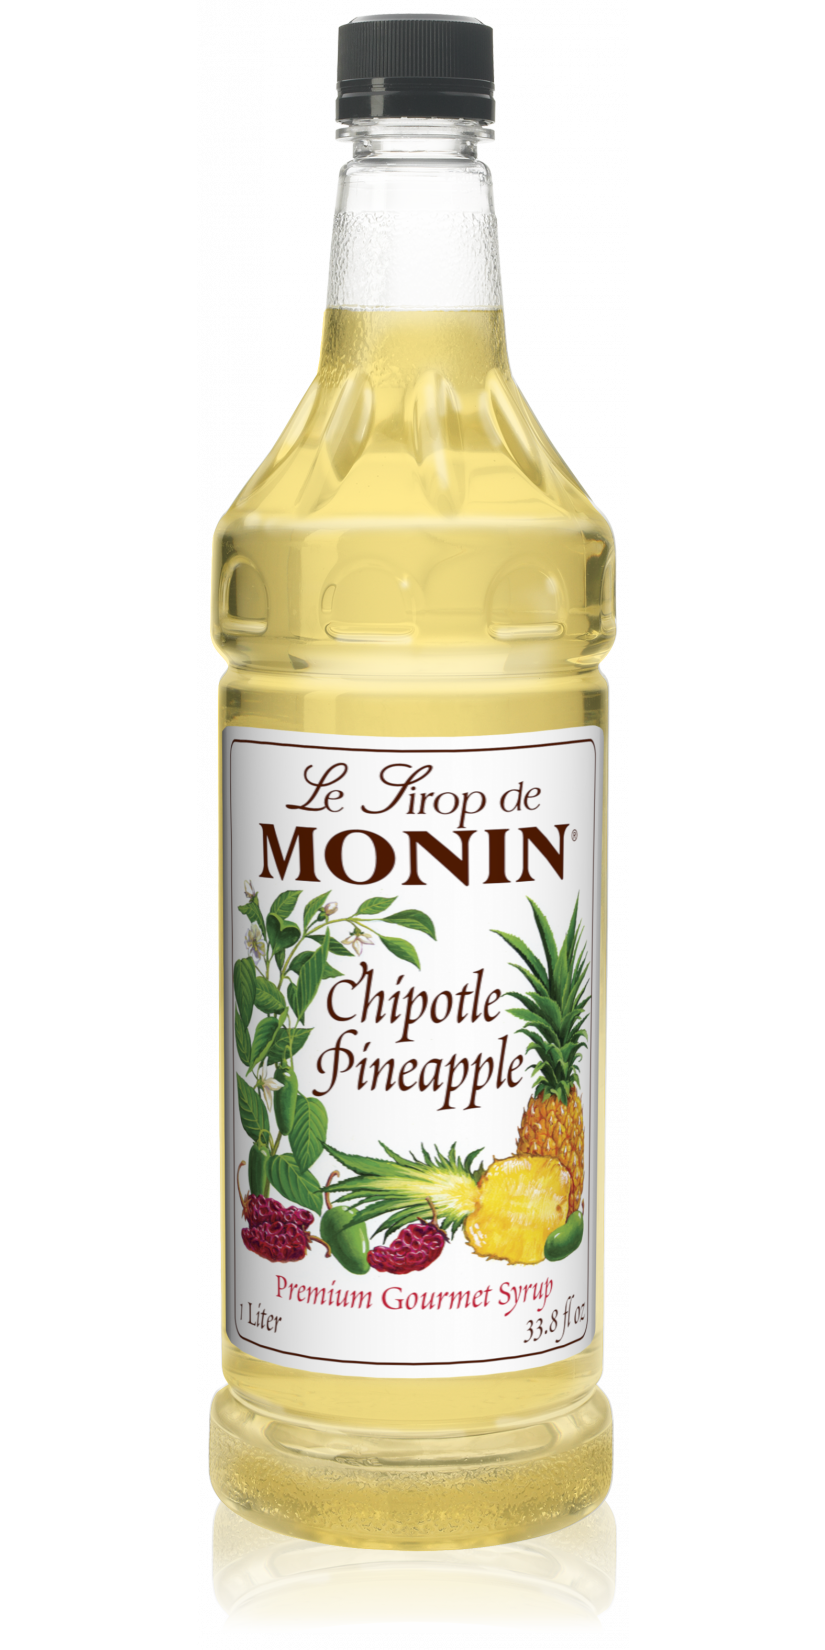 Monin Chipotle Pineapple Syrup